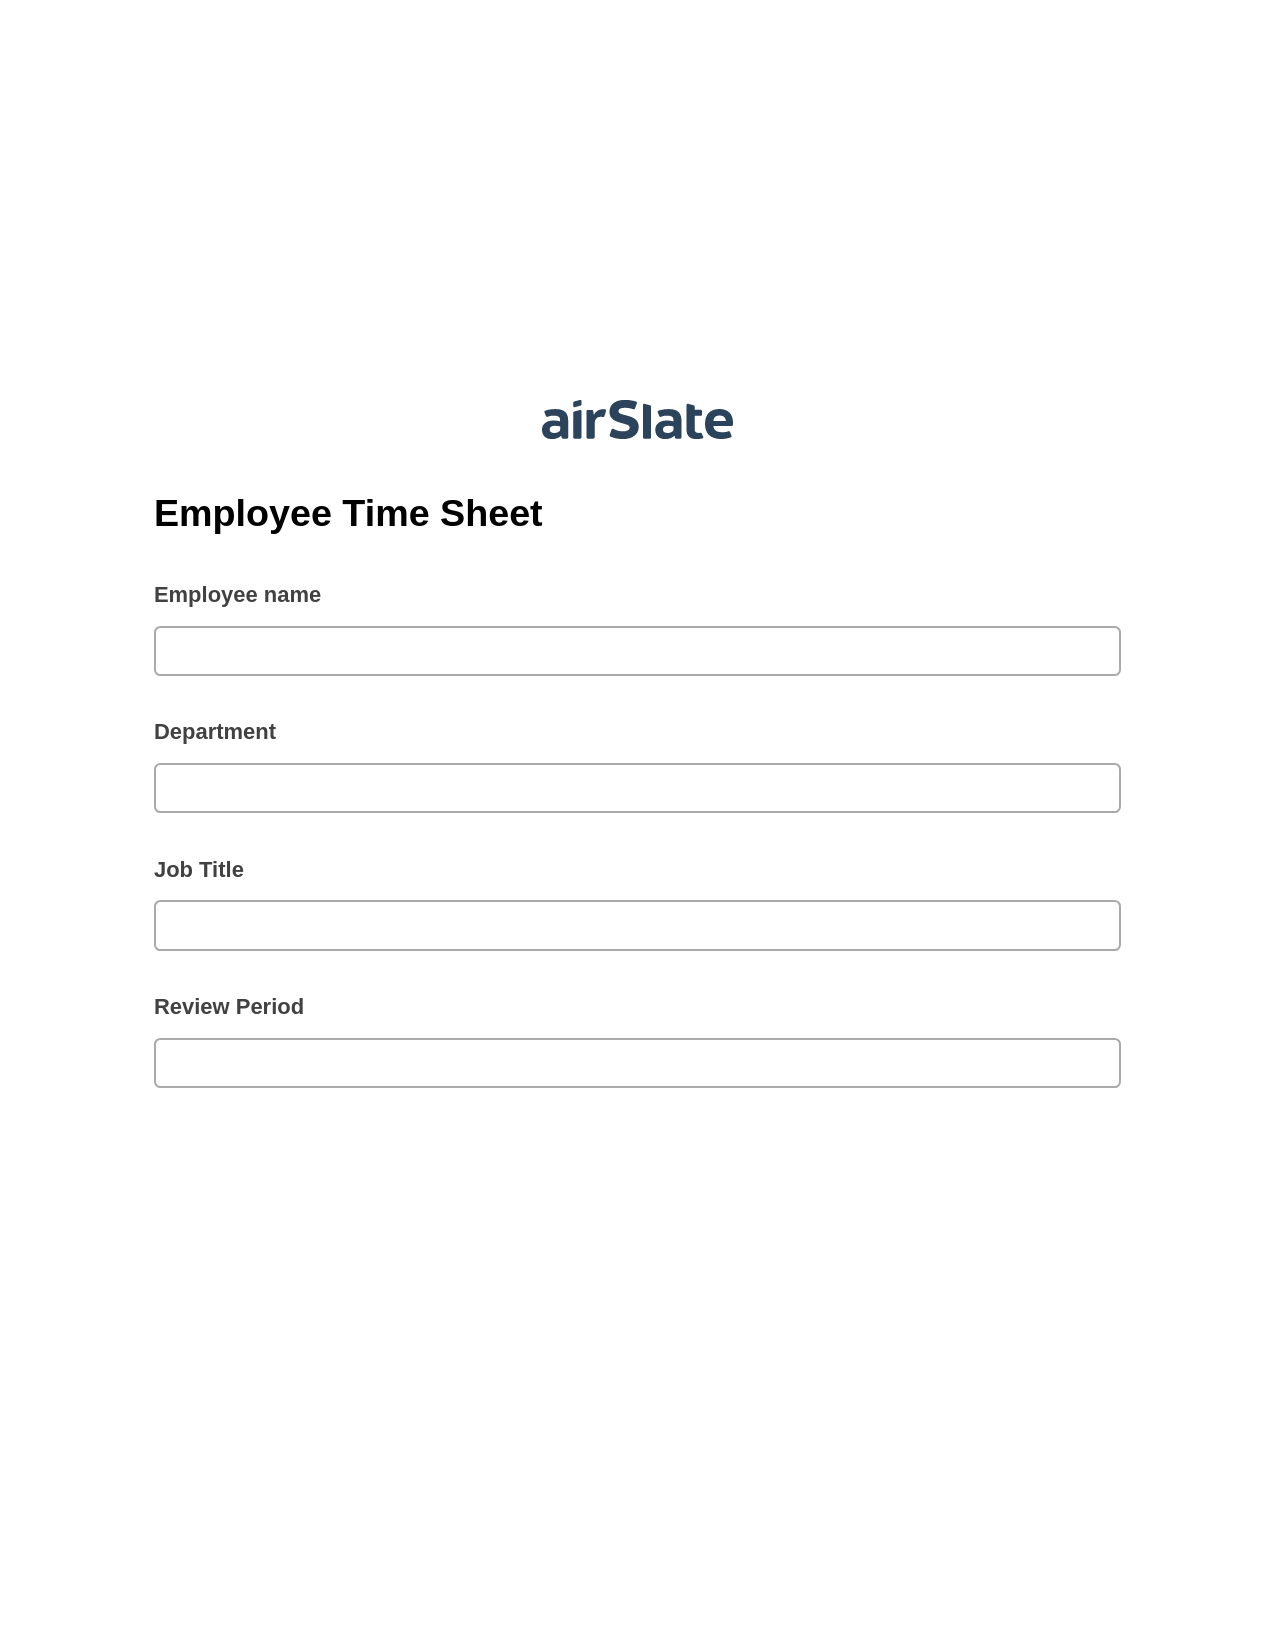 Employee Time Sheet Pre-fill Dropdowns from Airtable, Update Audit Trail Bot, Export to Salesforce Record Bot